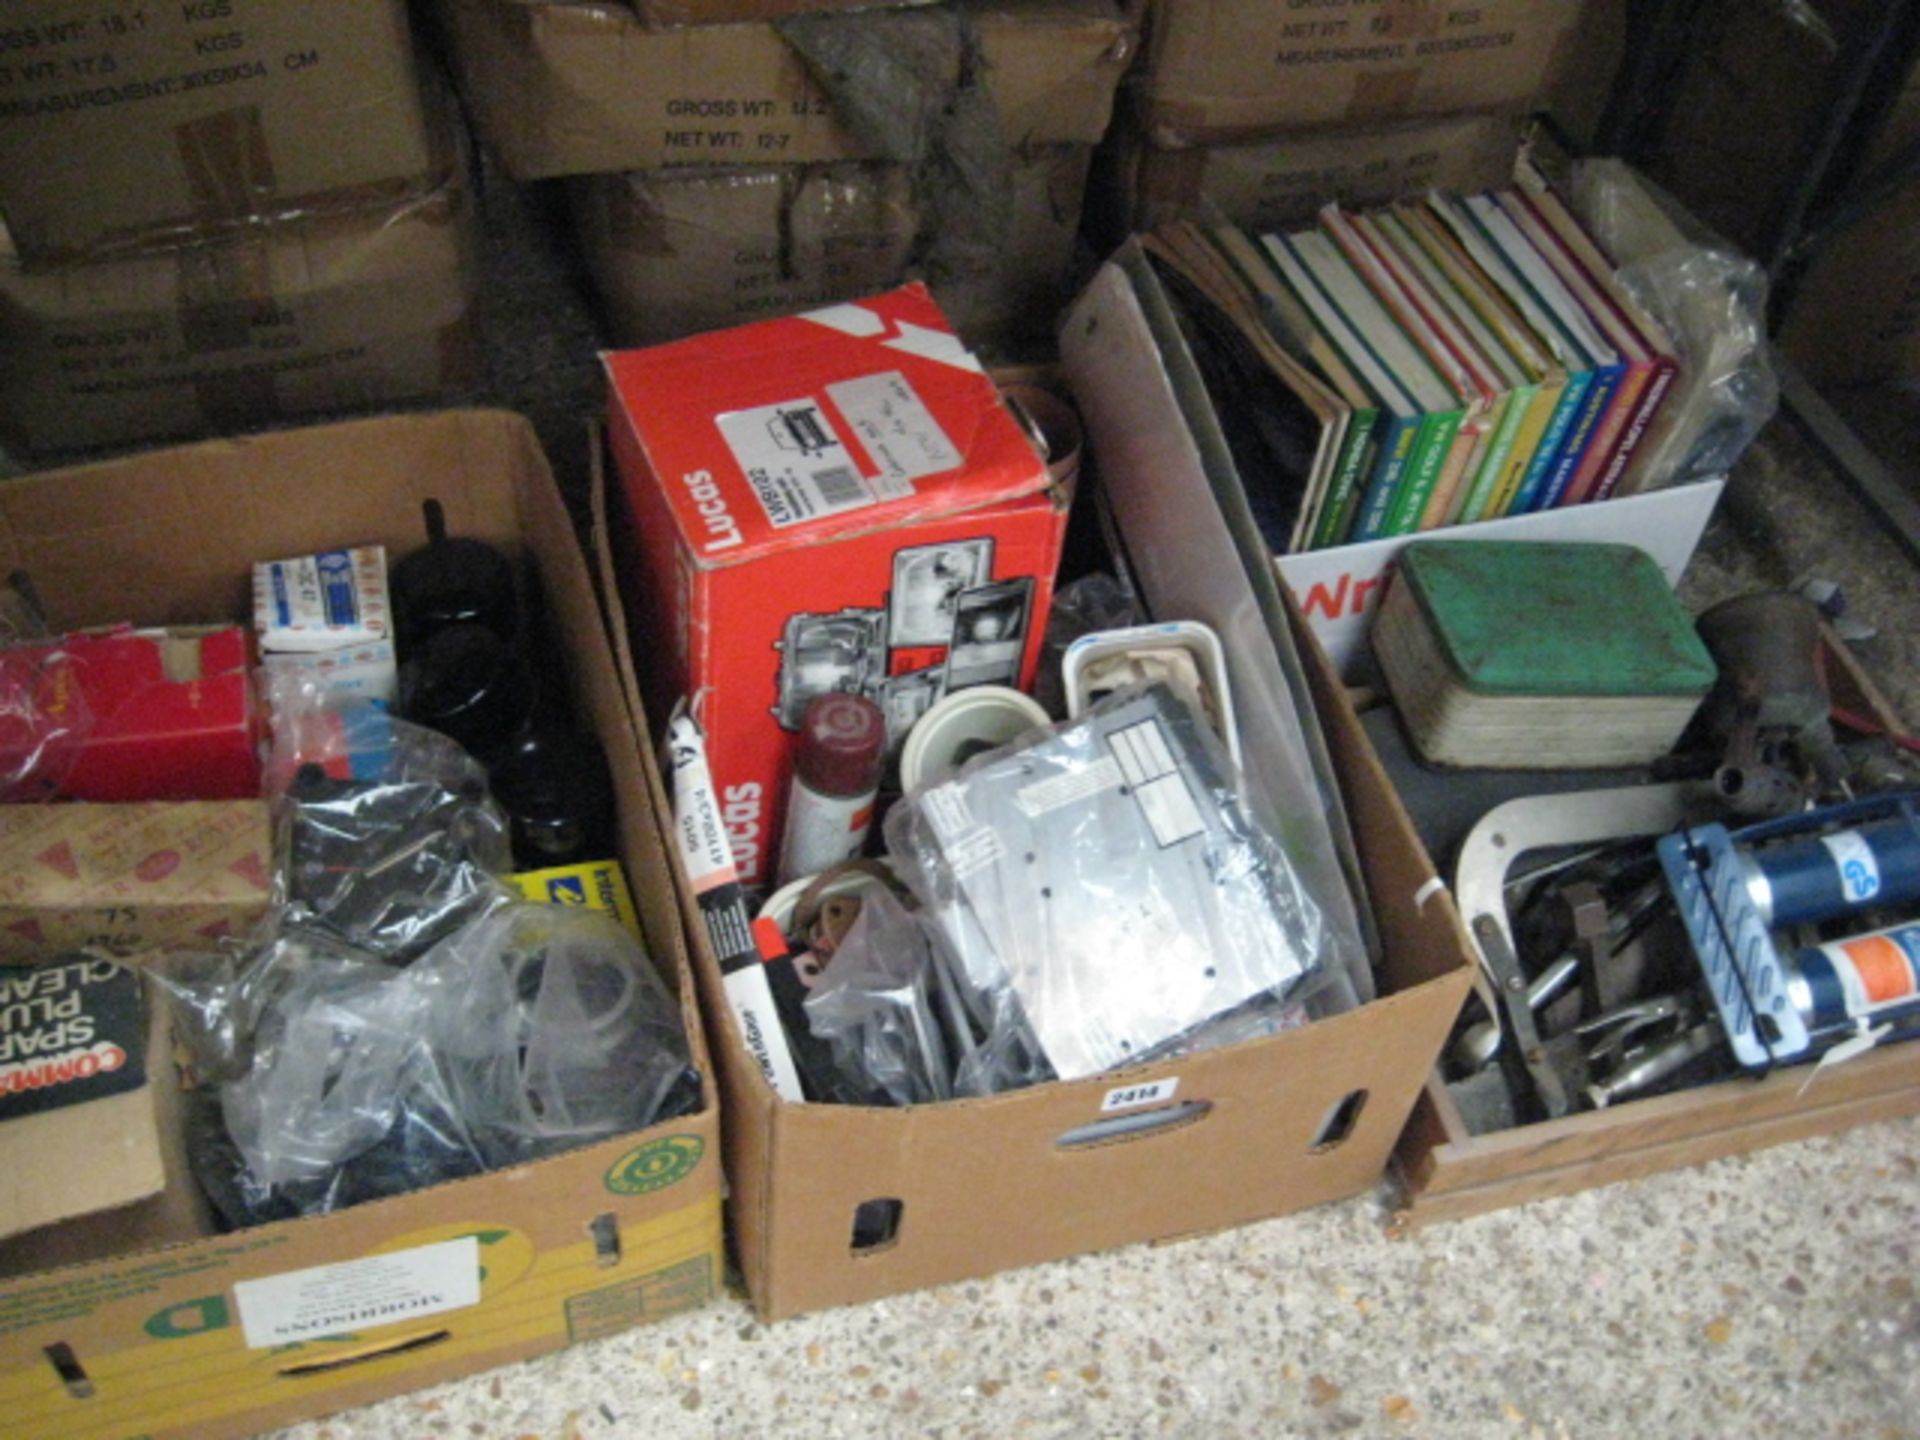 4 boxes of various car parts, car stereo, car manuals, car spares and other tools